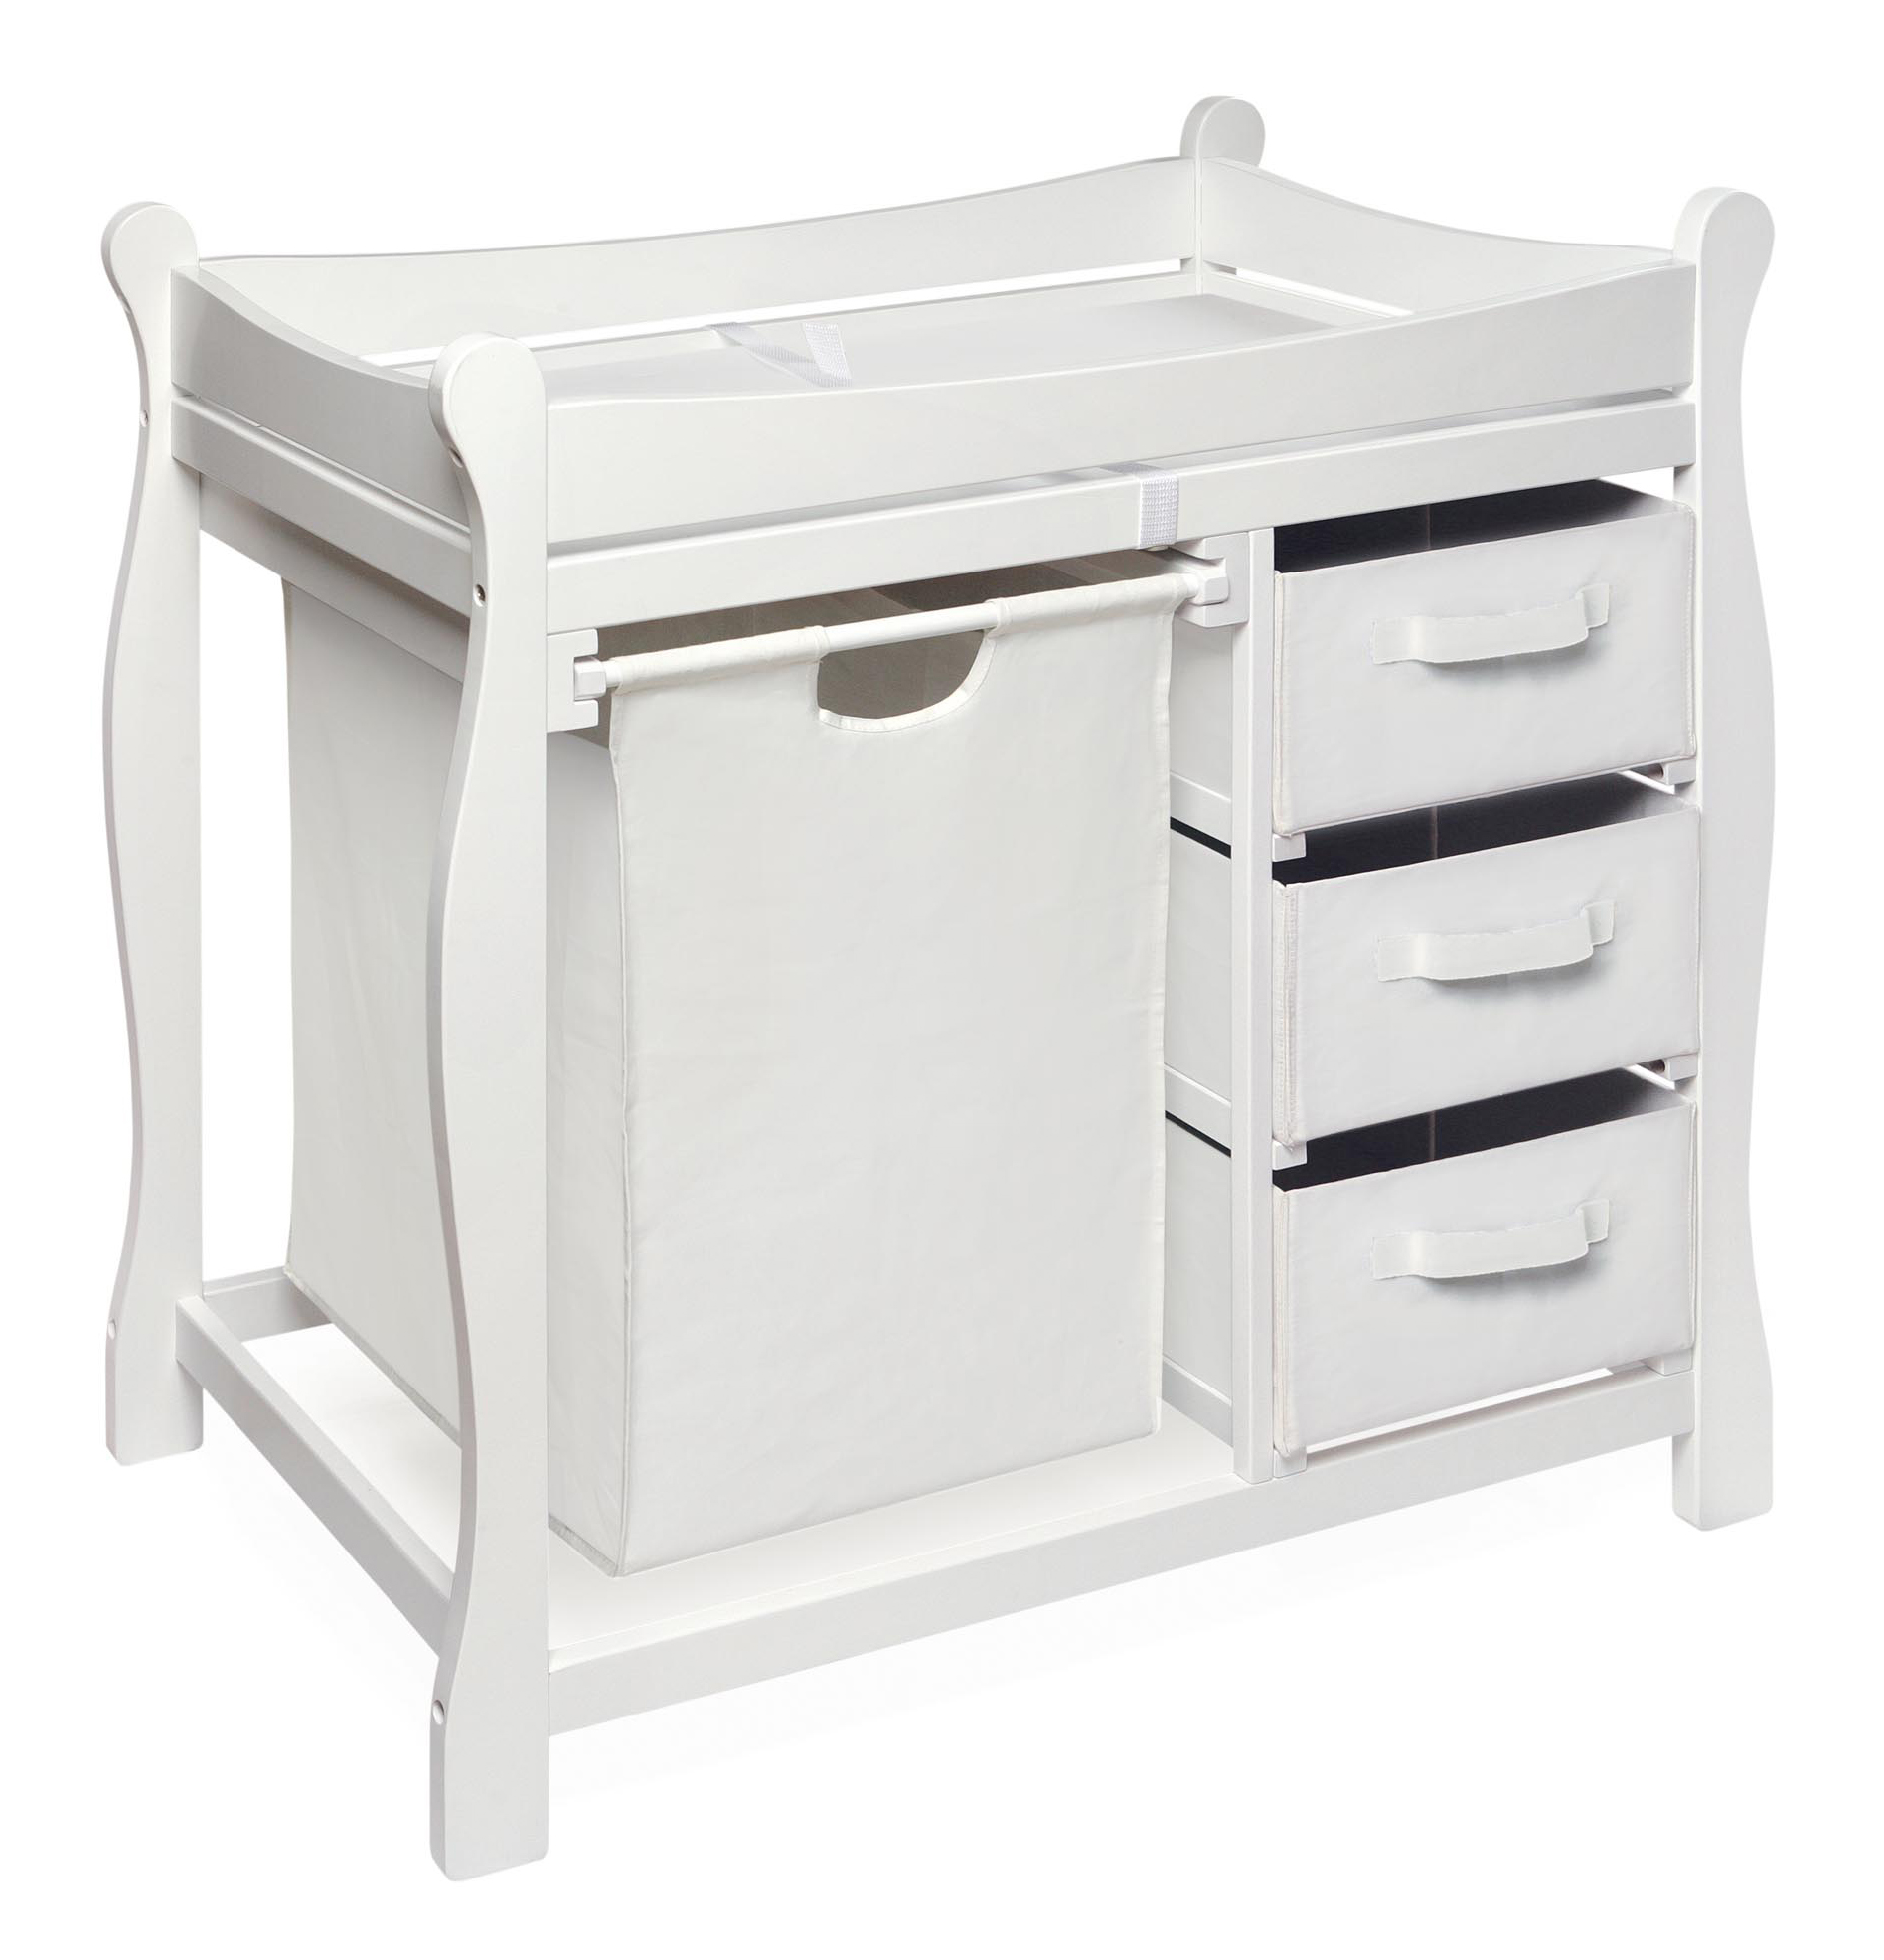 Sleigh Style Baby Changing Table with Hamper and 3 Baskets - White